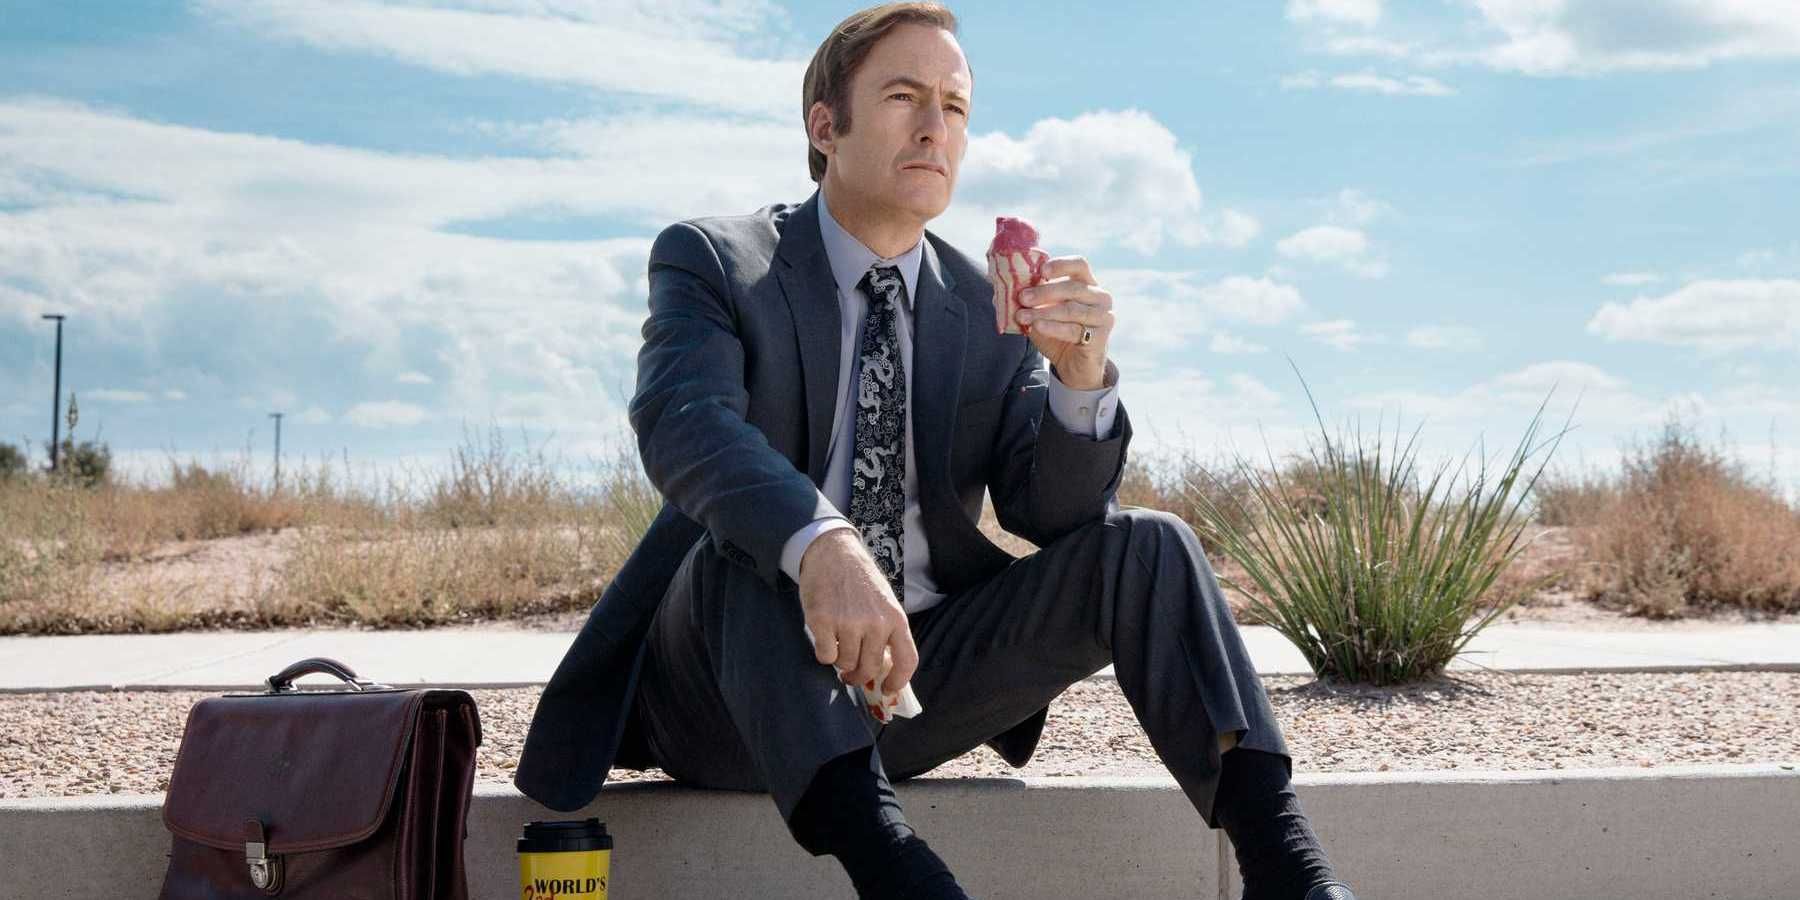 Better Call Saul 10 Episodes That Can Be Enjoyed On Their Own (Outside